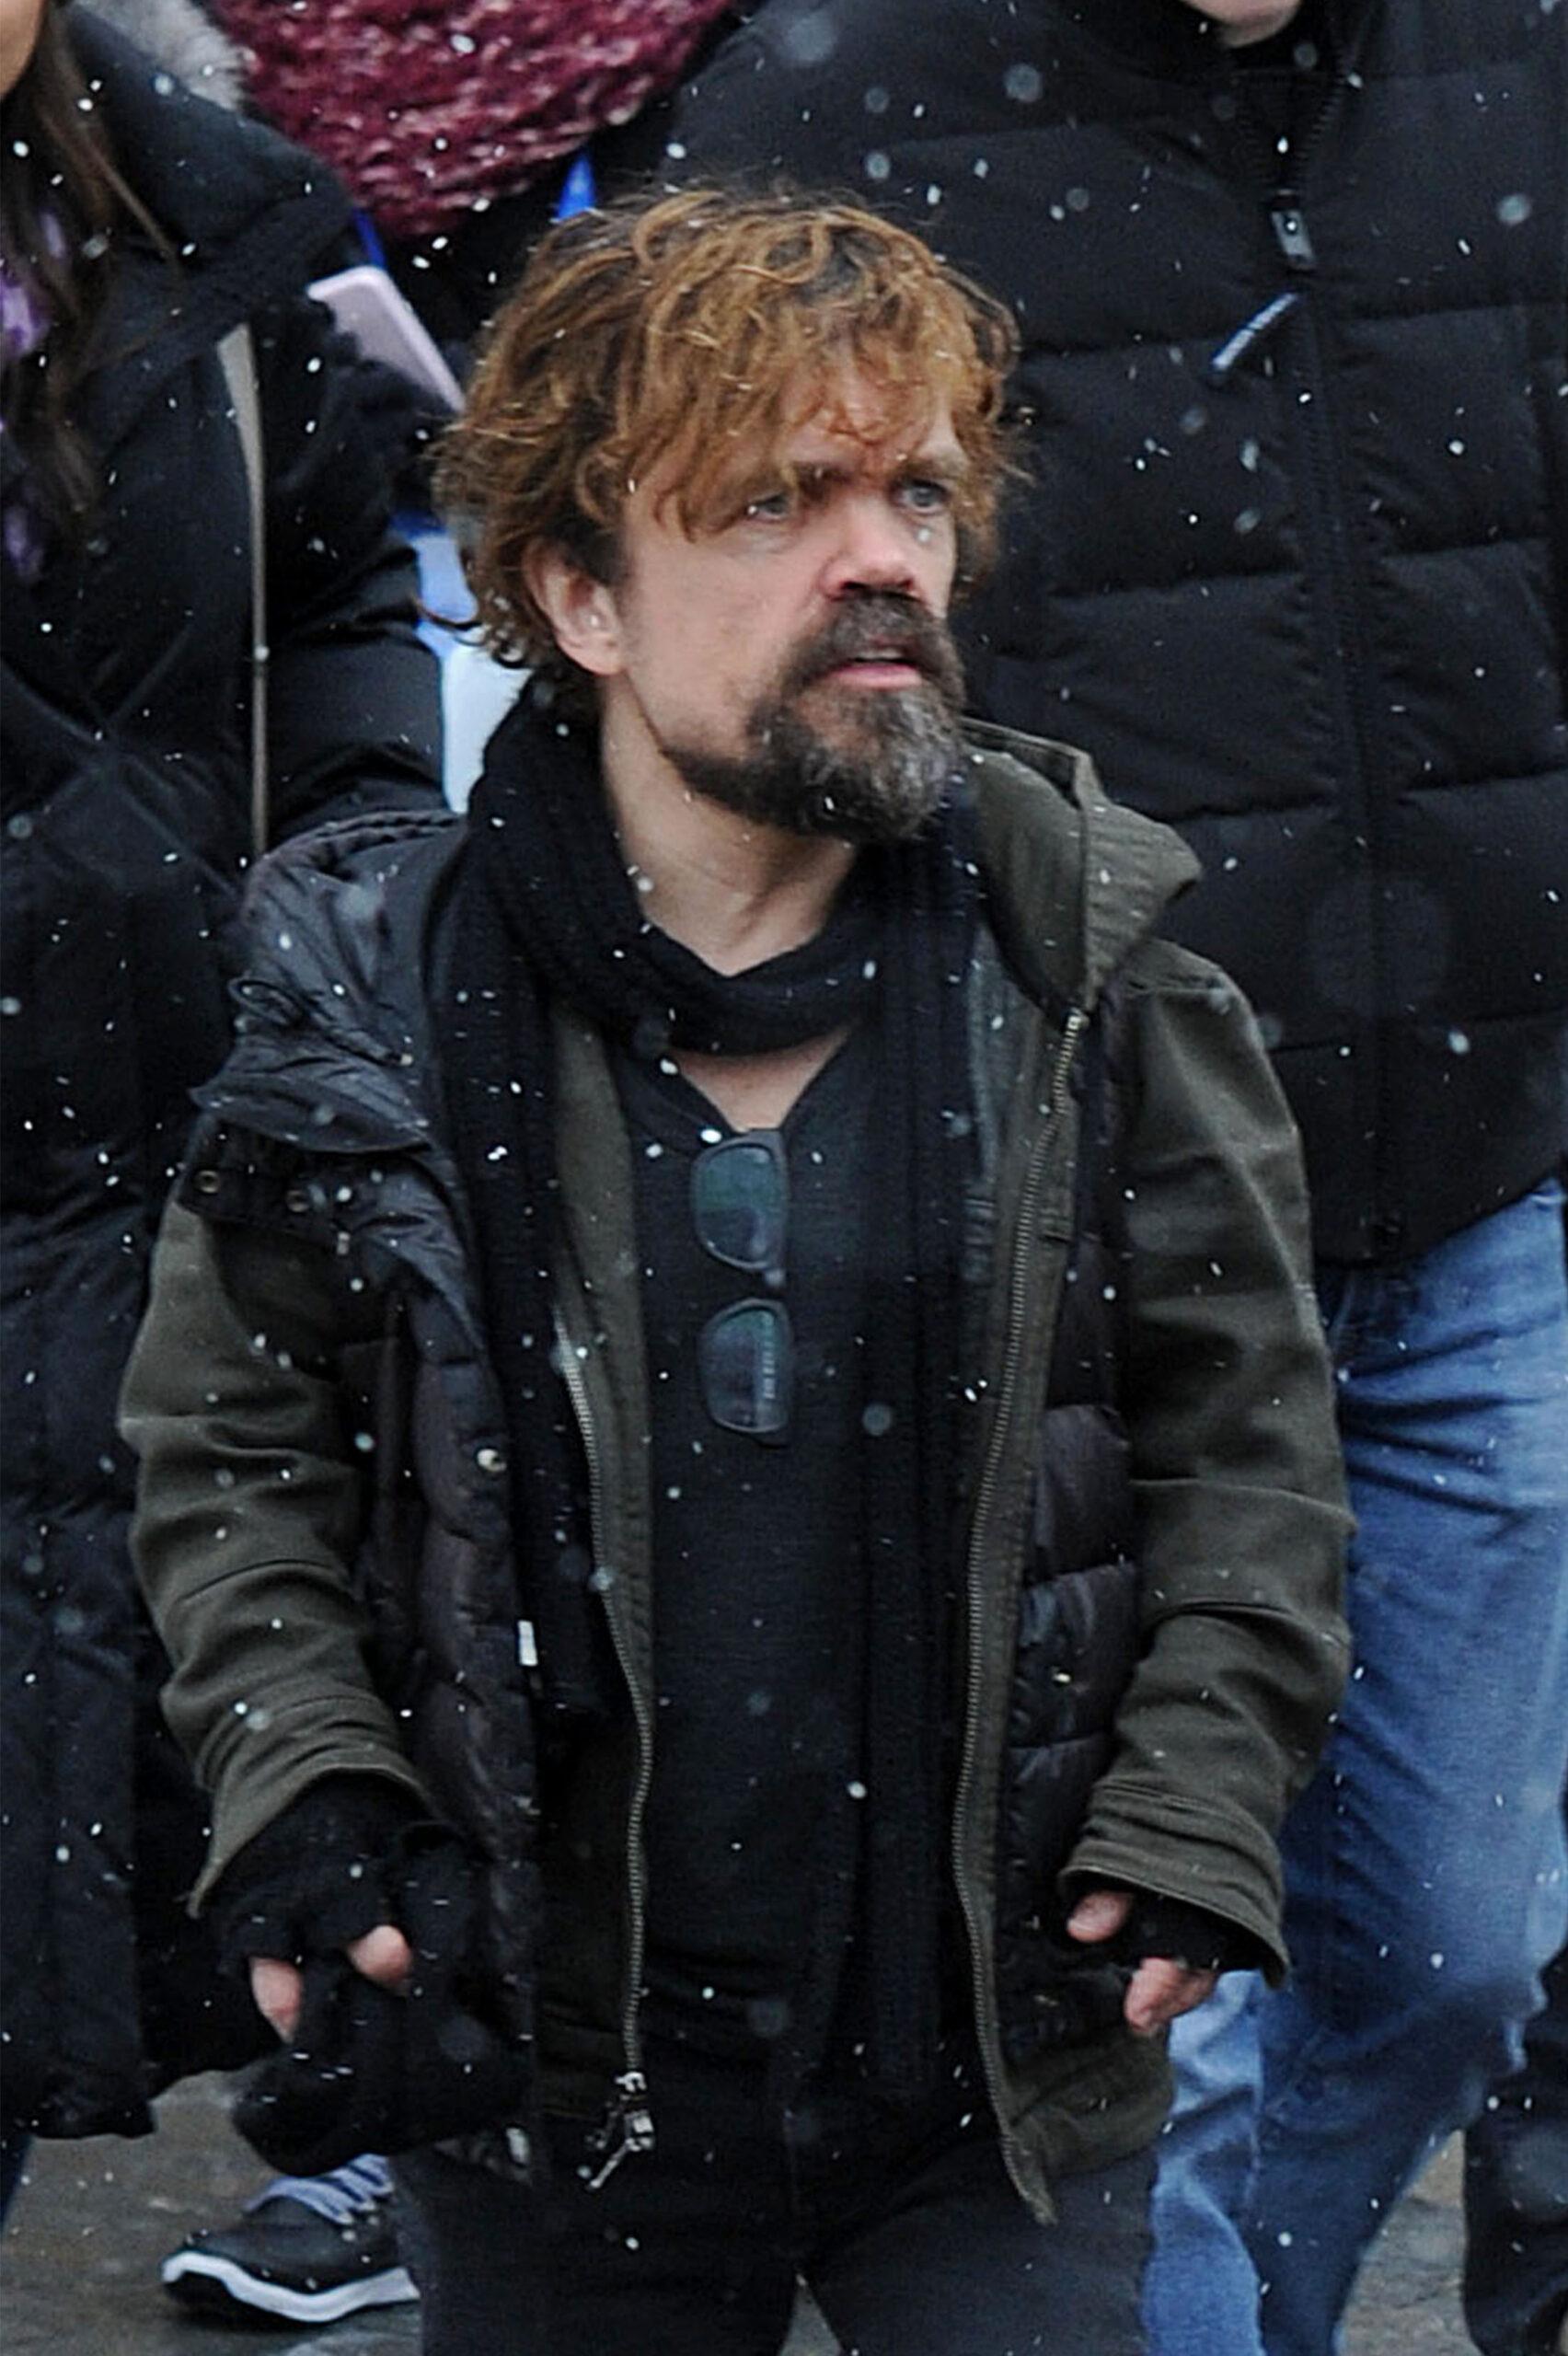 Peter Dinklage and Elle Fanning promote their film at the Sundance Film Festival